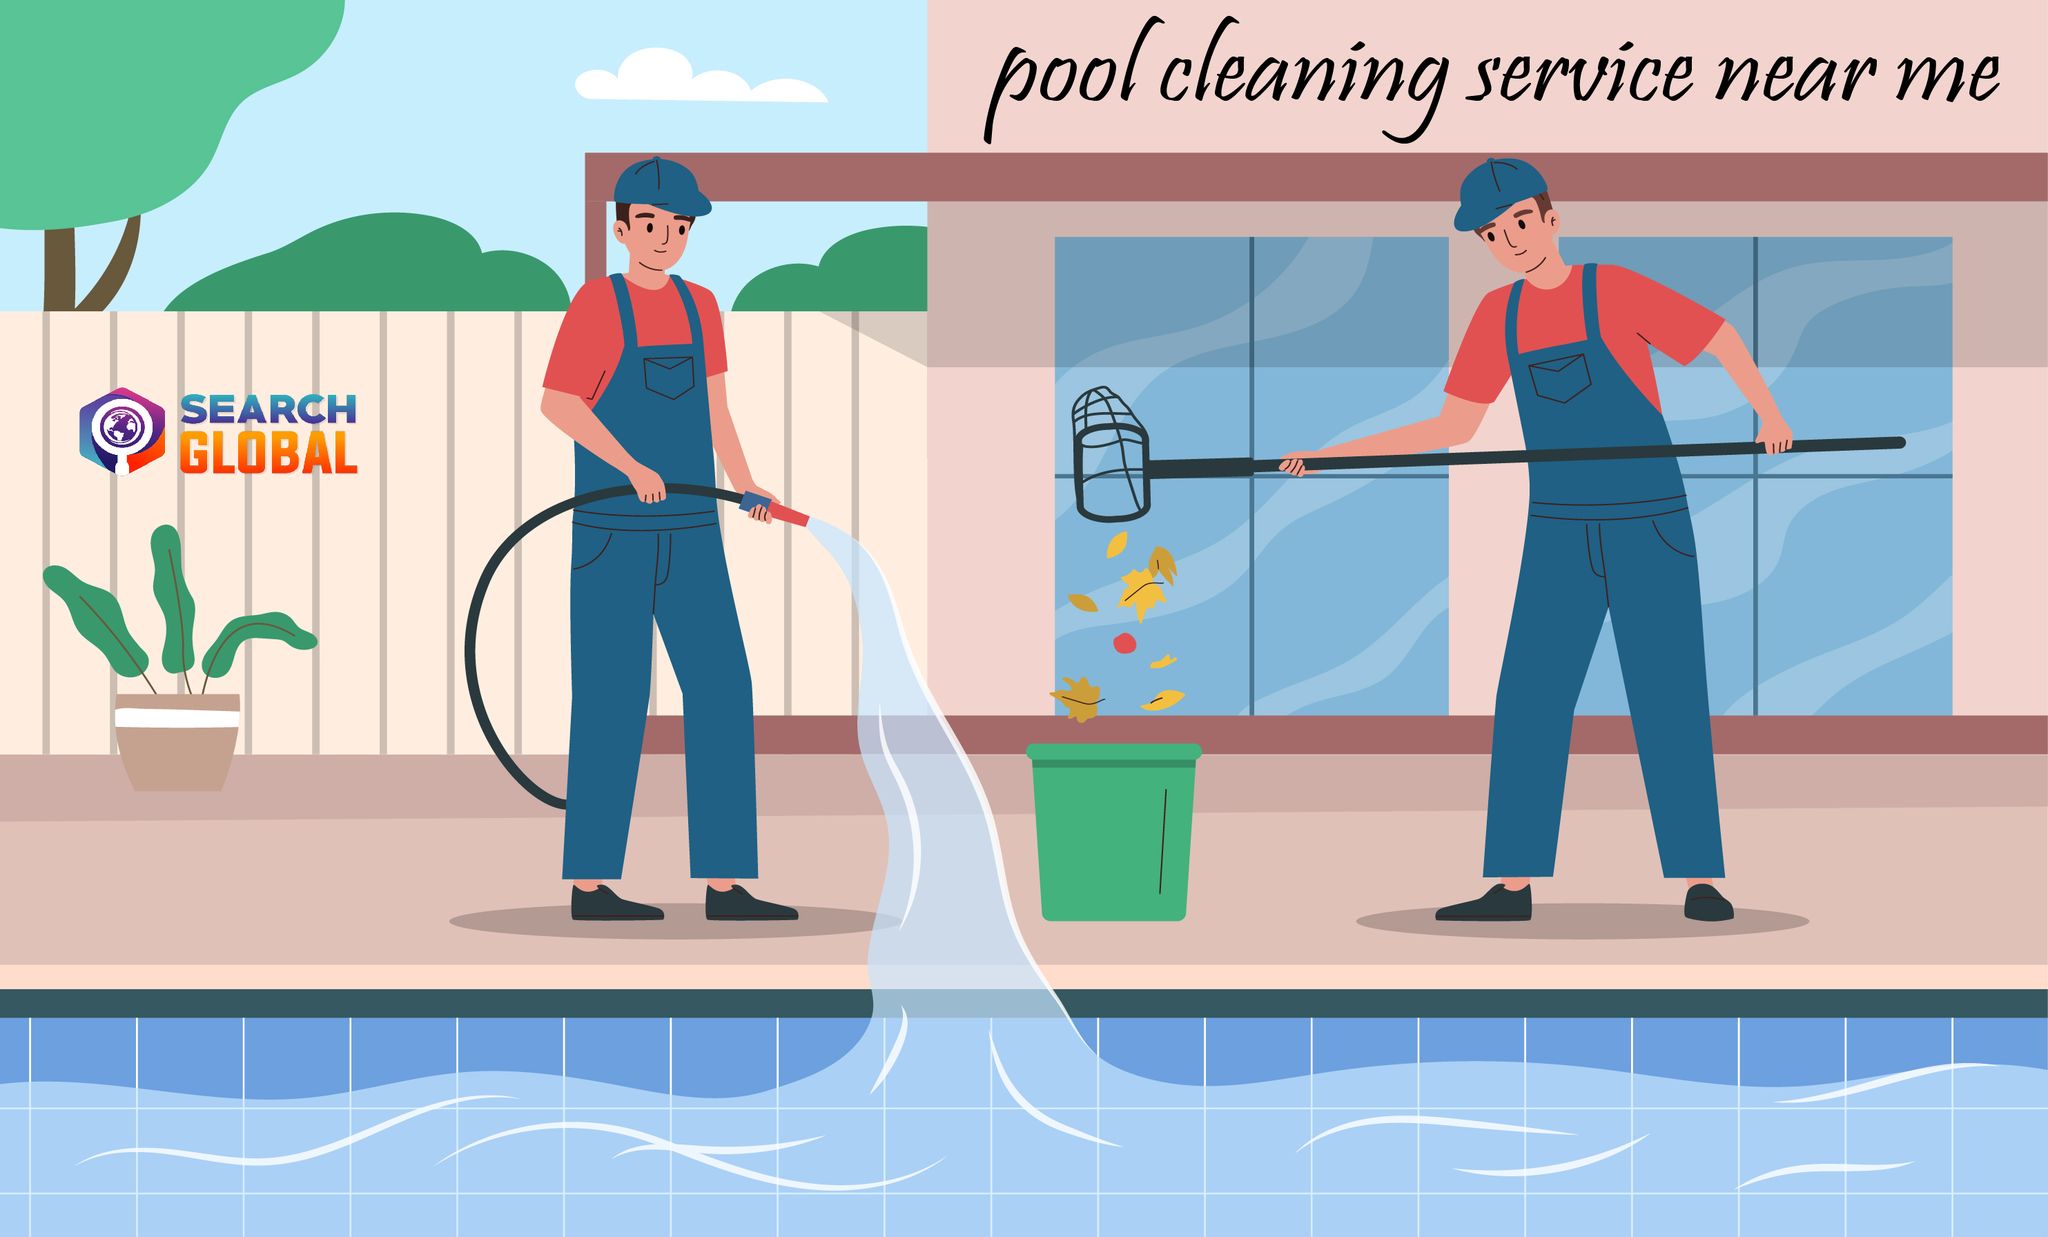 Pool cleaning service near me